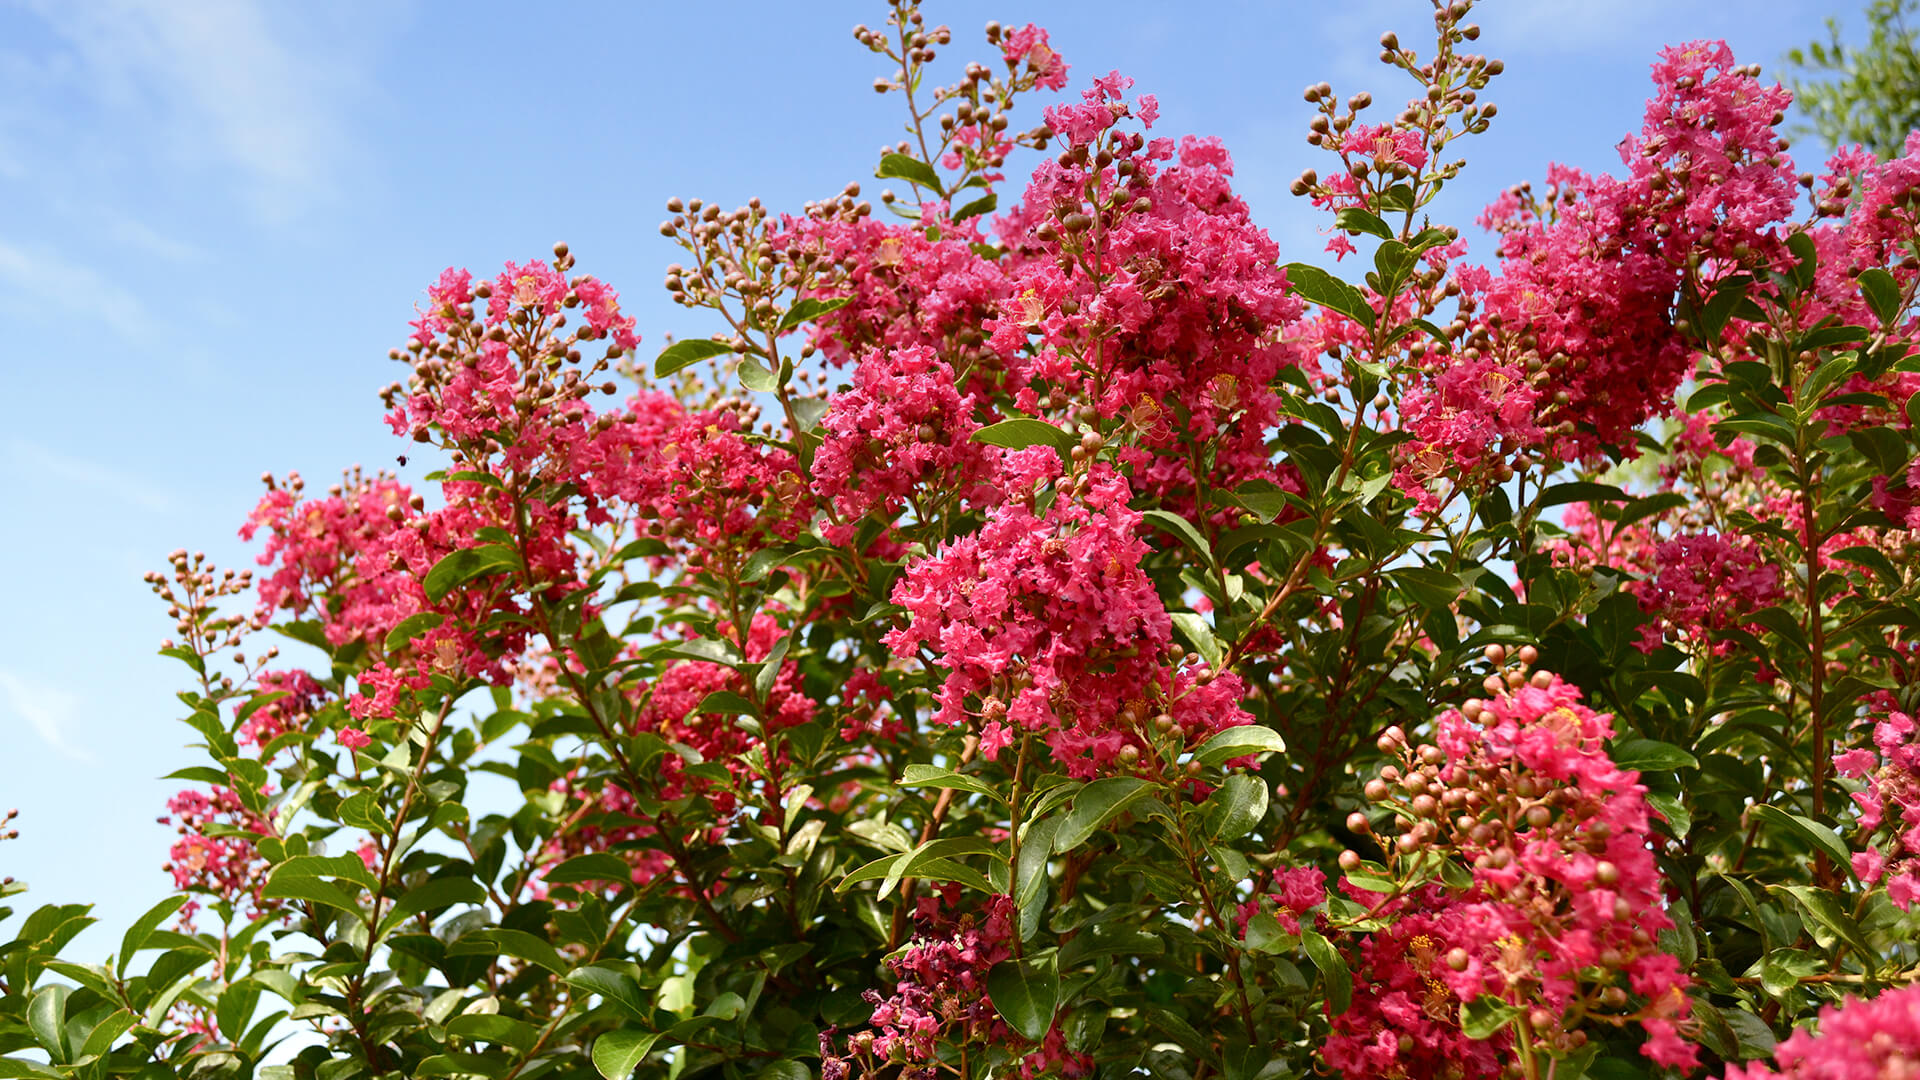 Crape myrtle tree covered in pink blossoms